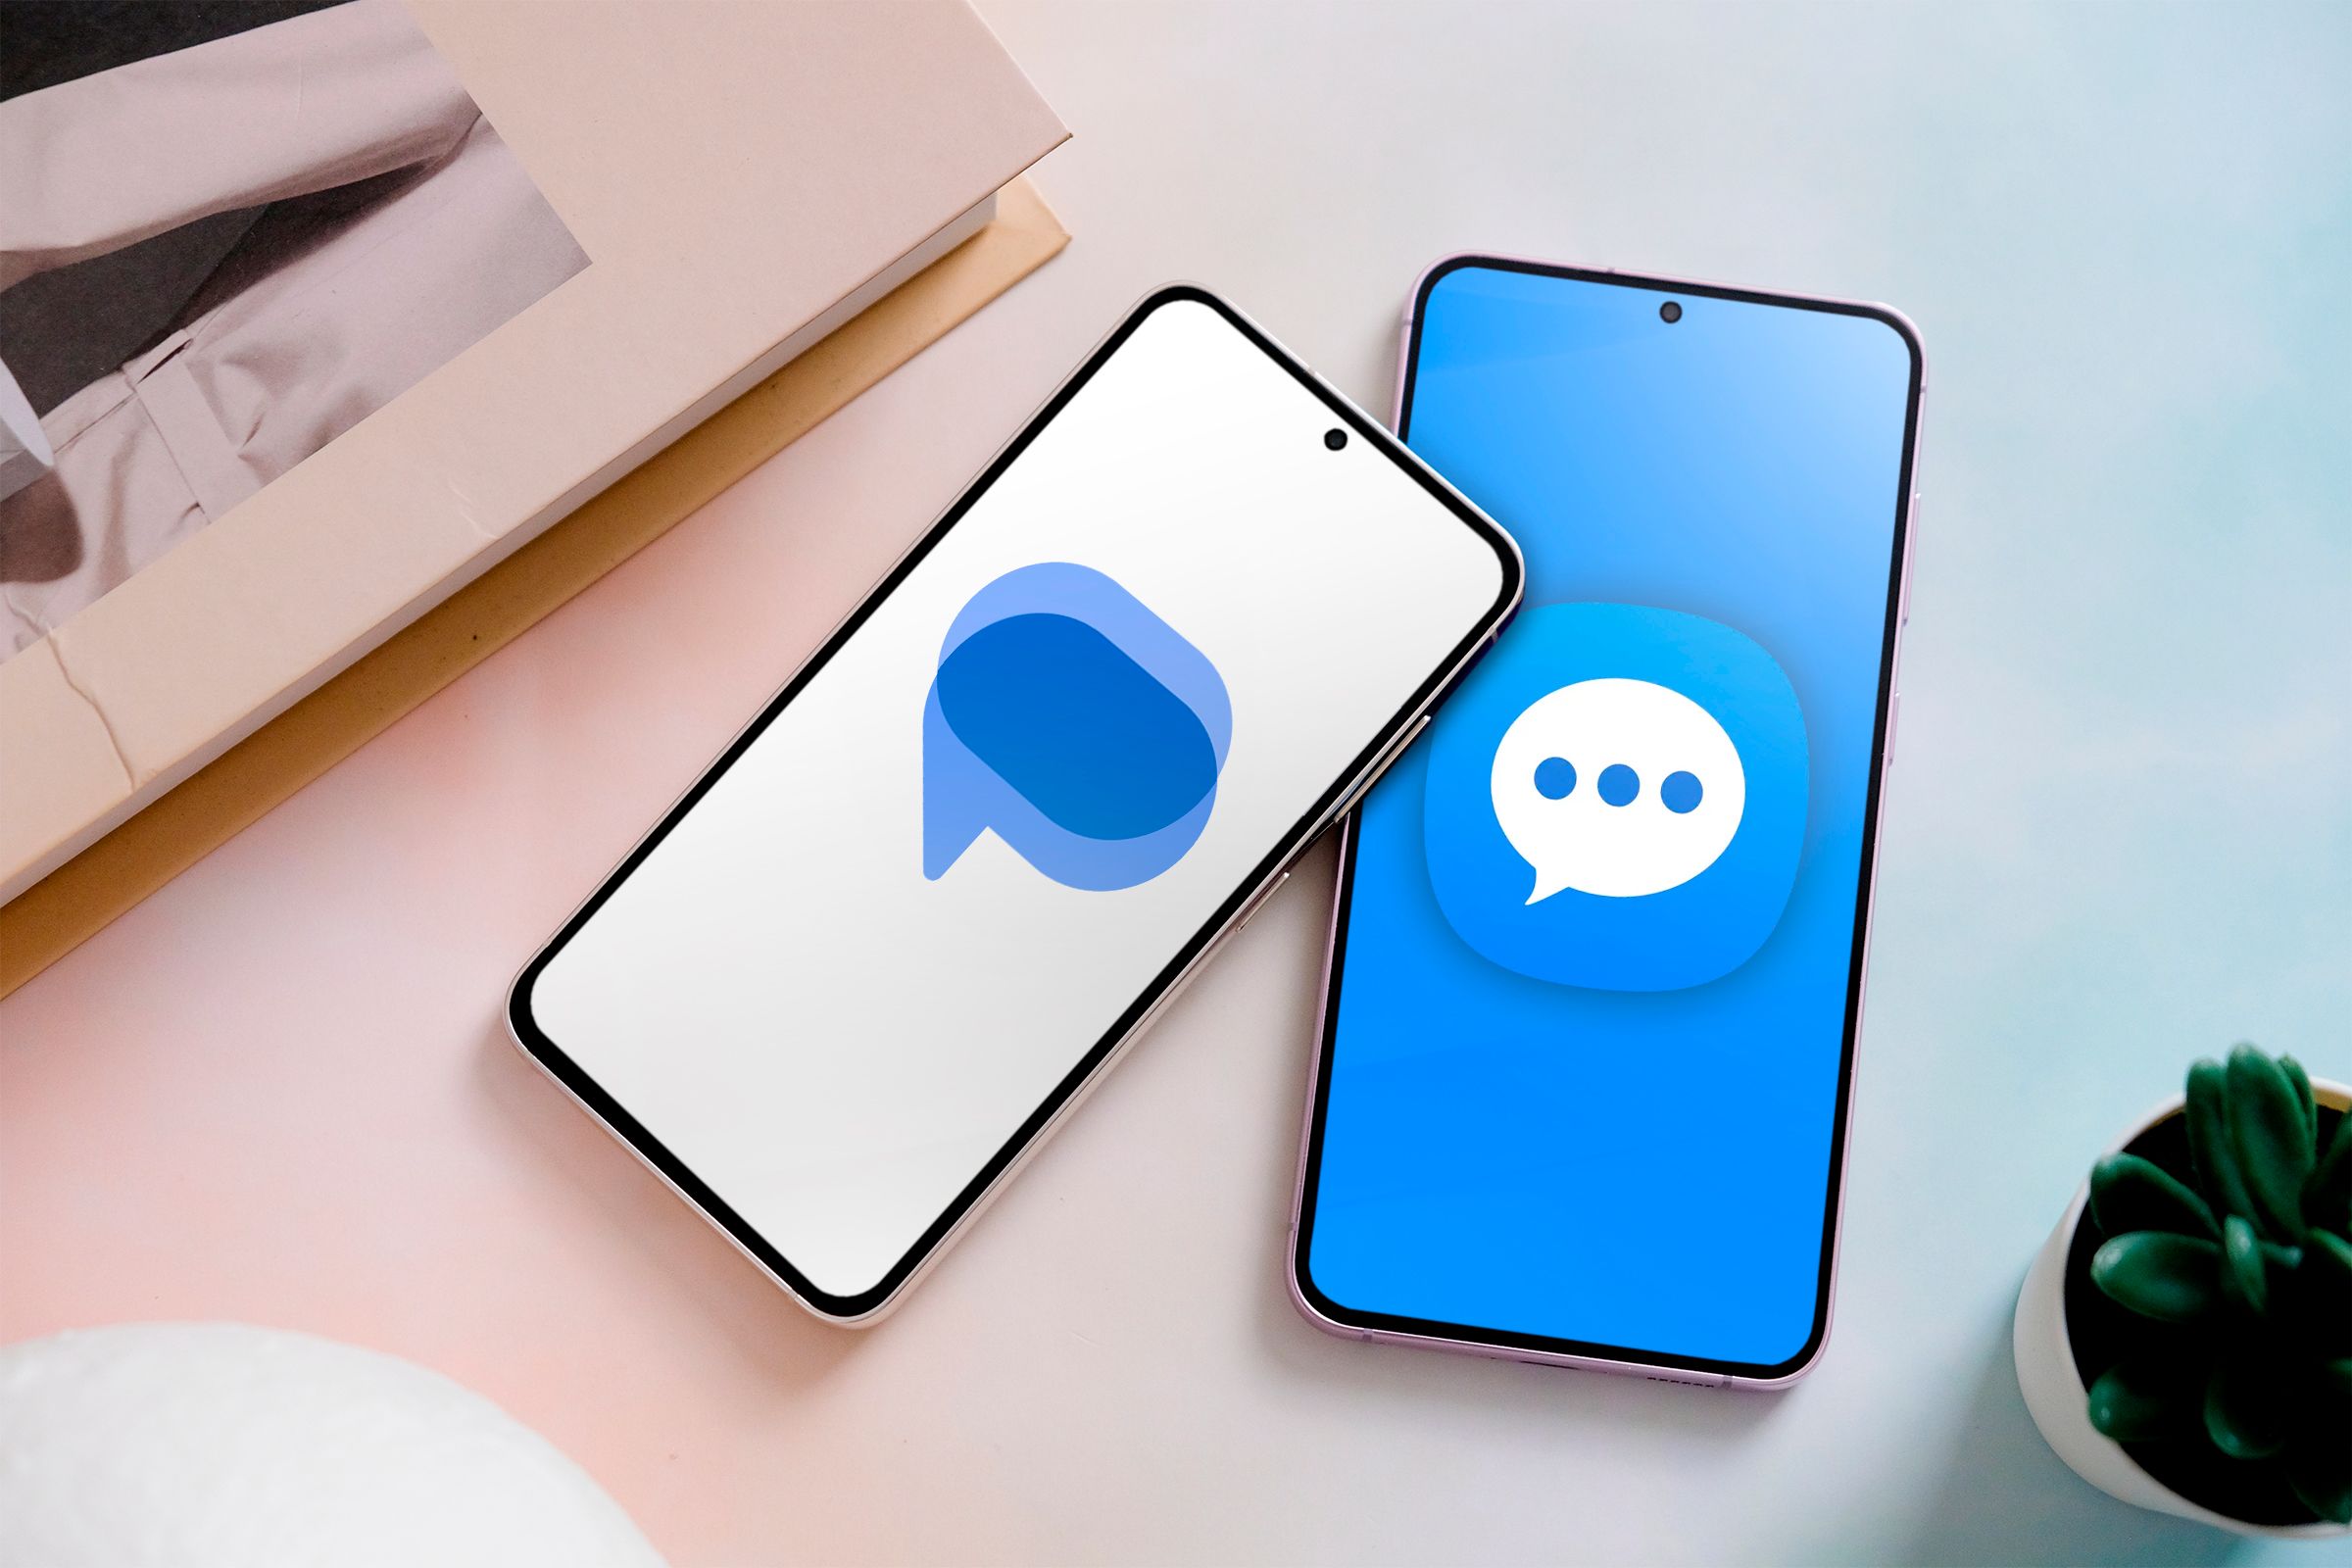 A phone with Google Messages icon on the left side, and a phone with Samsung Messages icon on the right side.